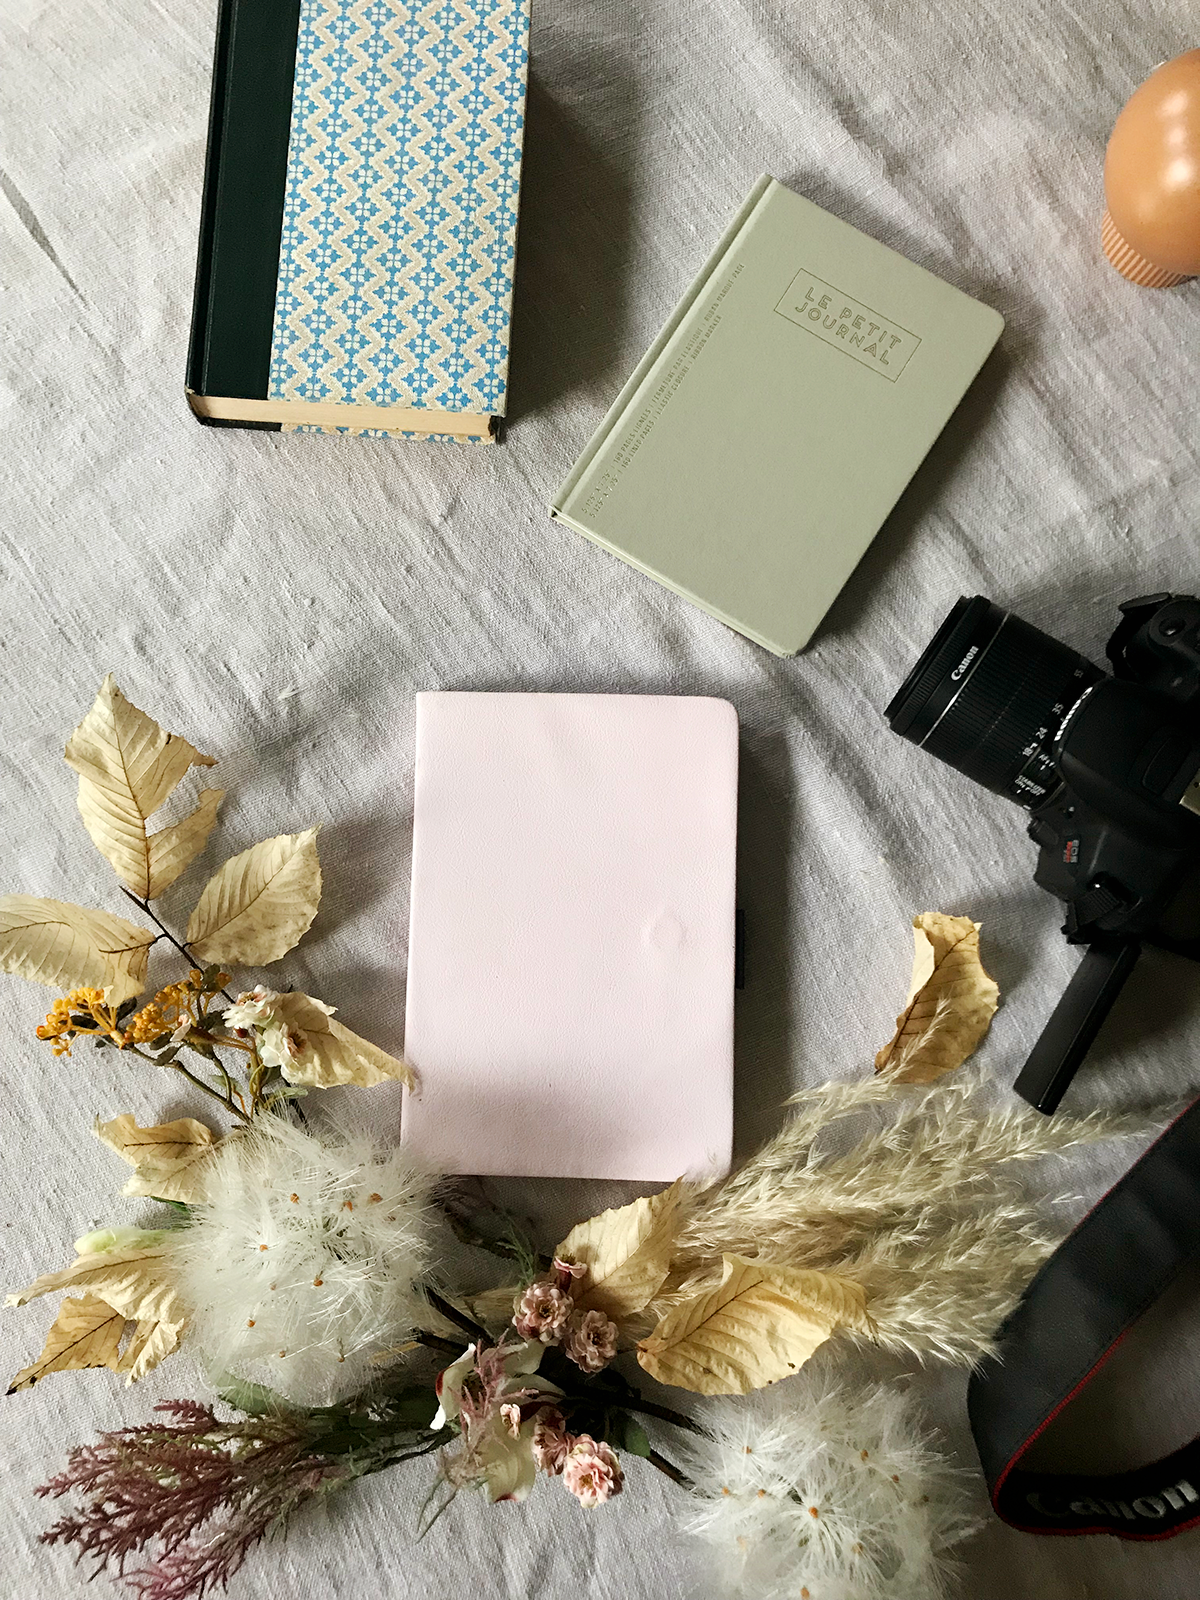 Behind The Scenes: The Making of The Spring Flora Collection